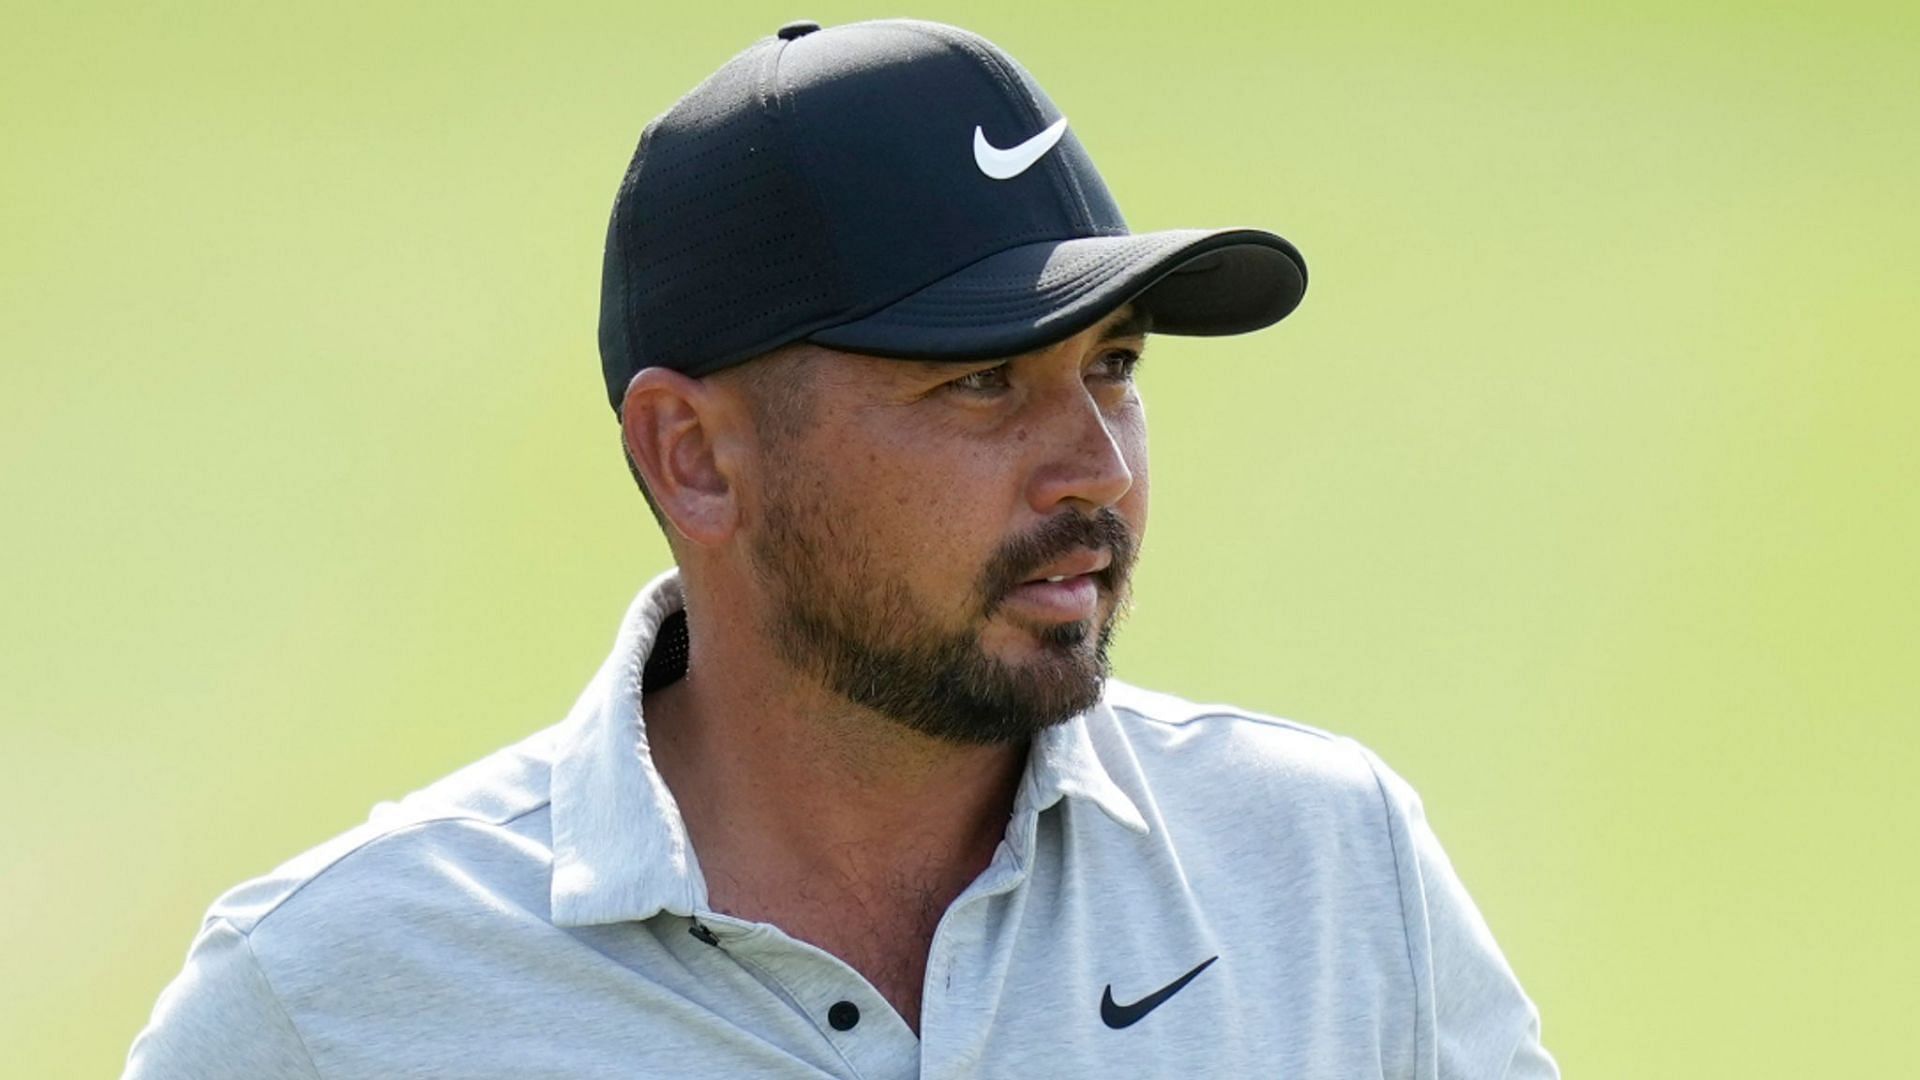 Jason Day qualifies for the 2023 Masters despite losing to Scottie Scheffler at the WGC Dell Match Play 